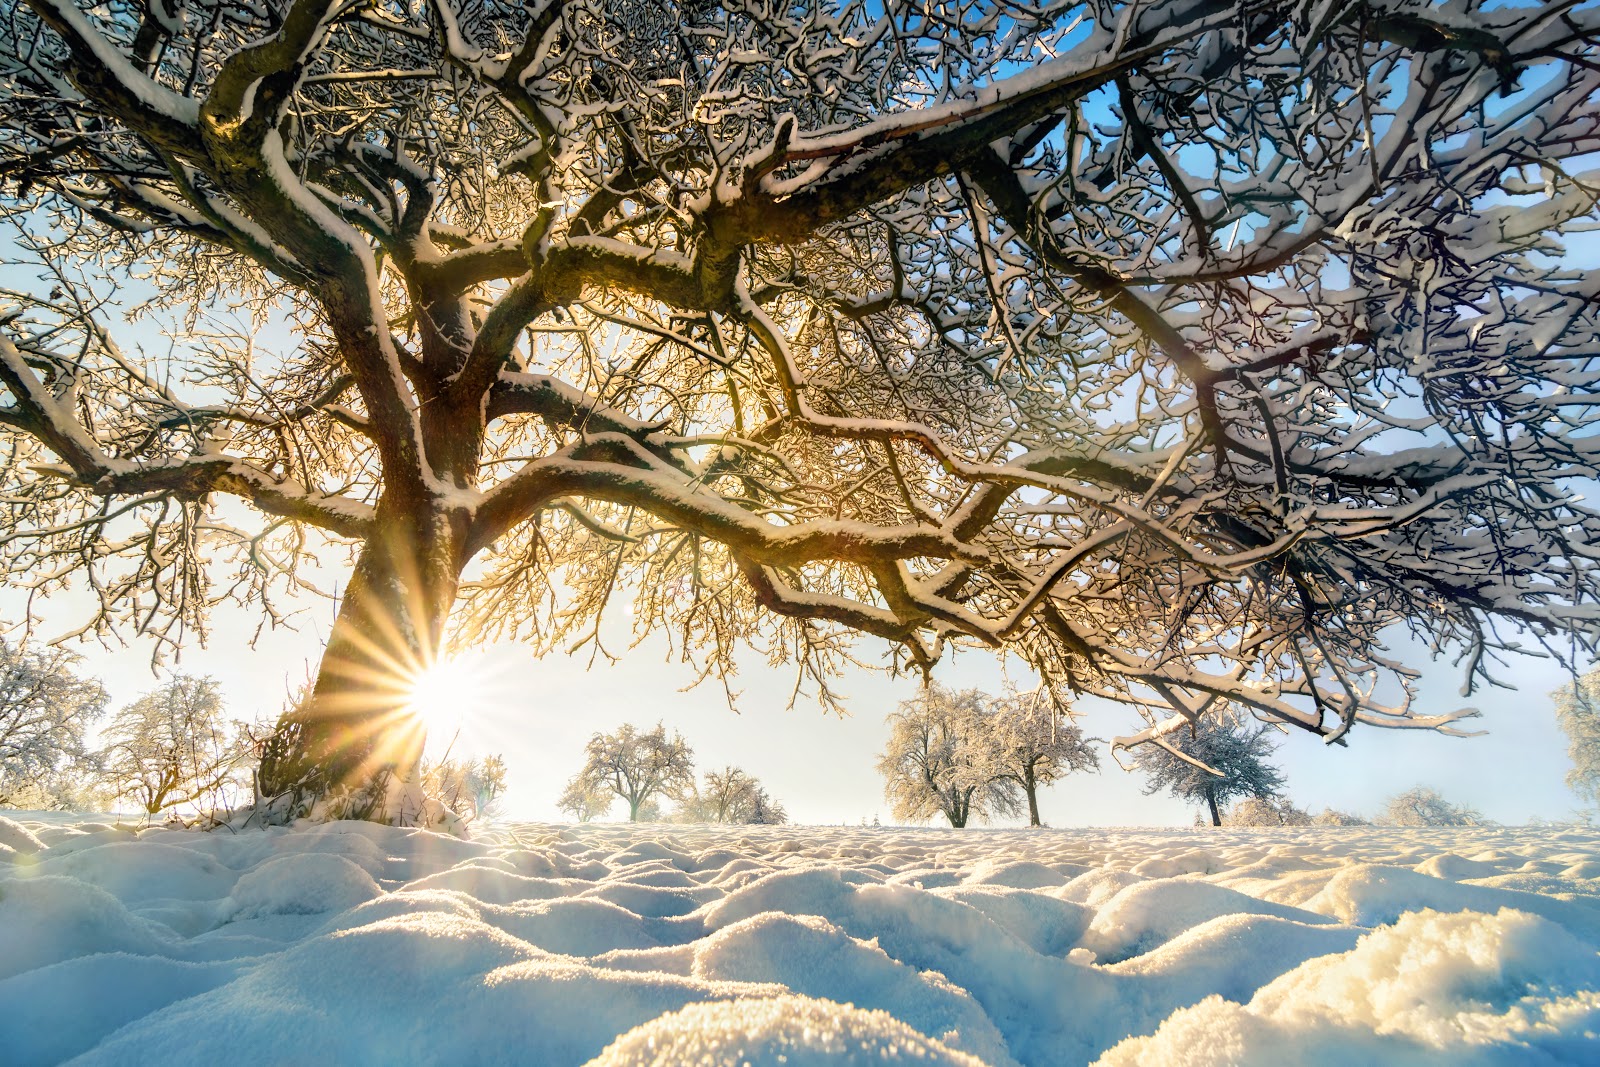 Snow covered ground and trees with a starburst of sun peeking just above the horizon